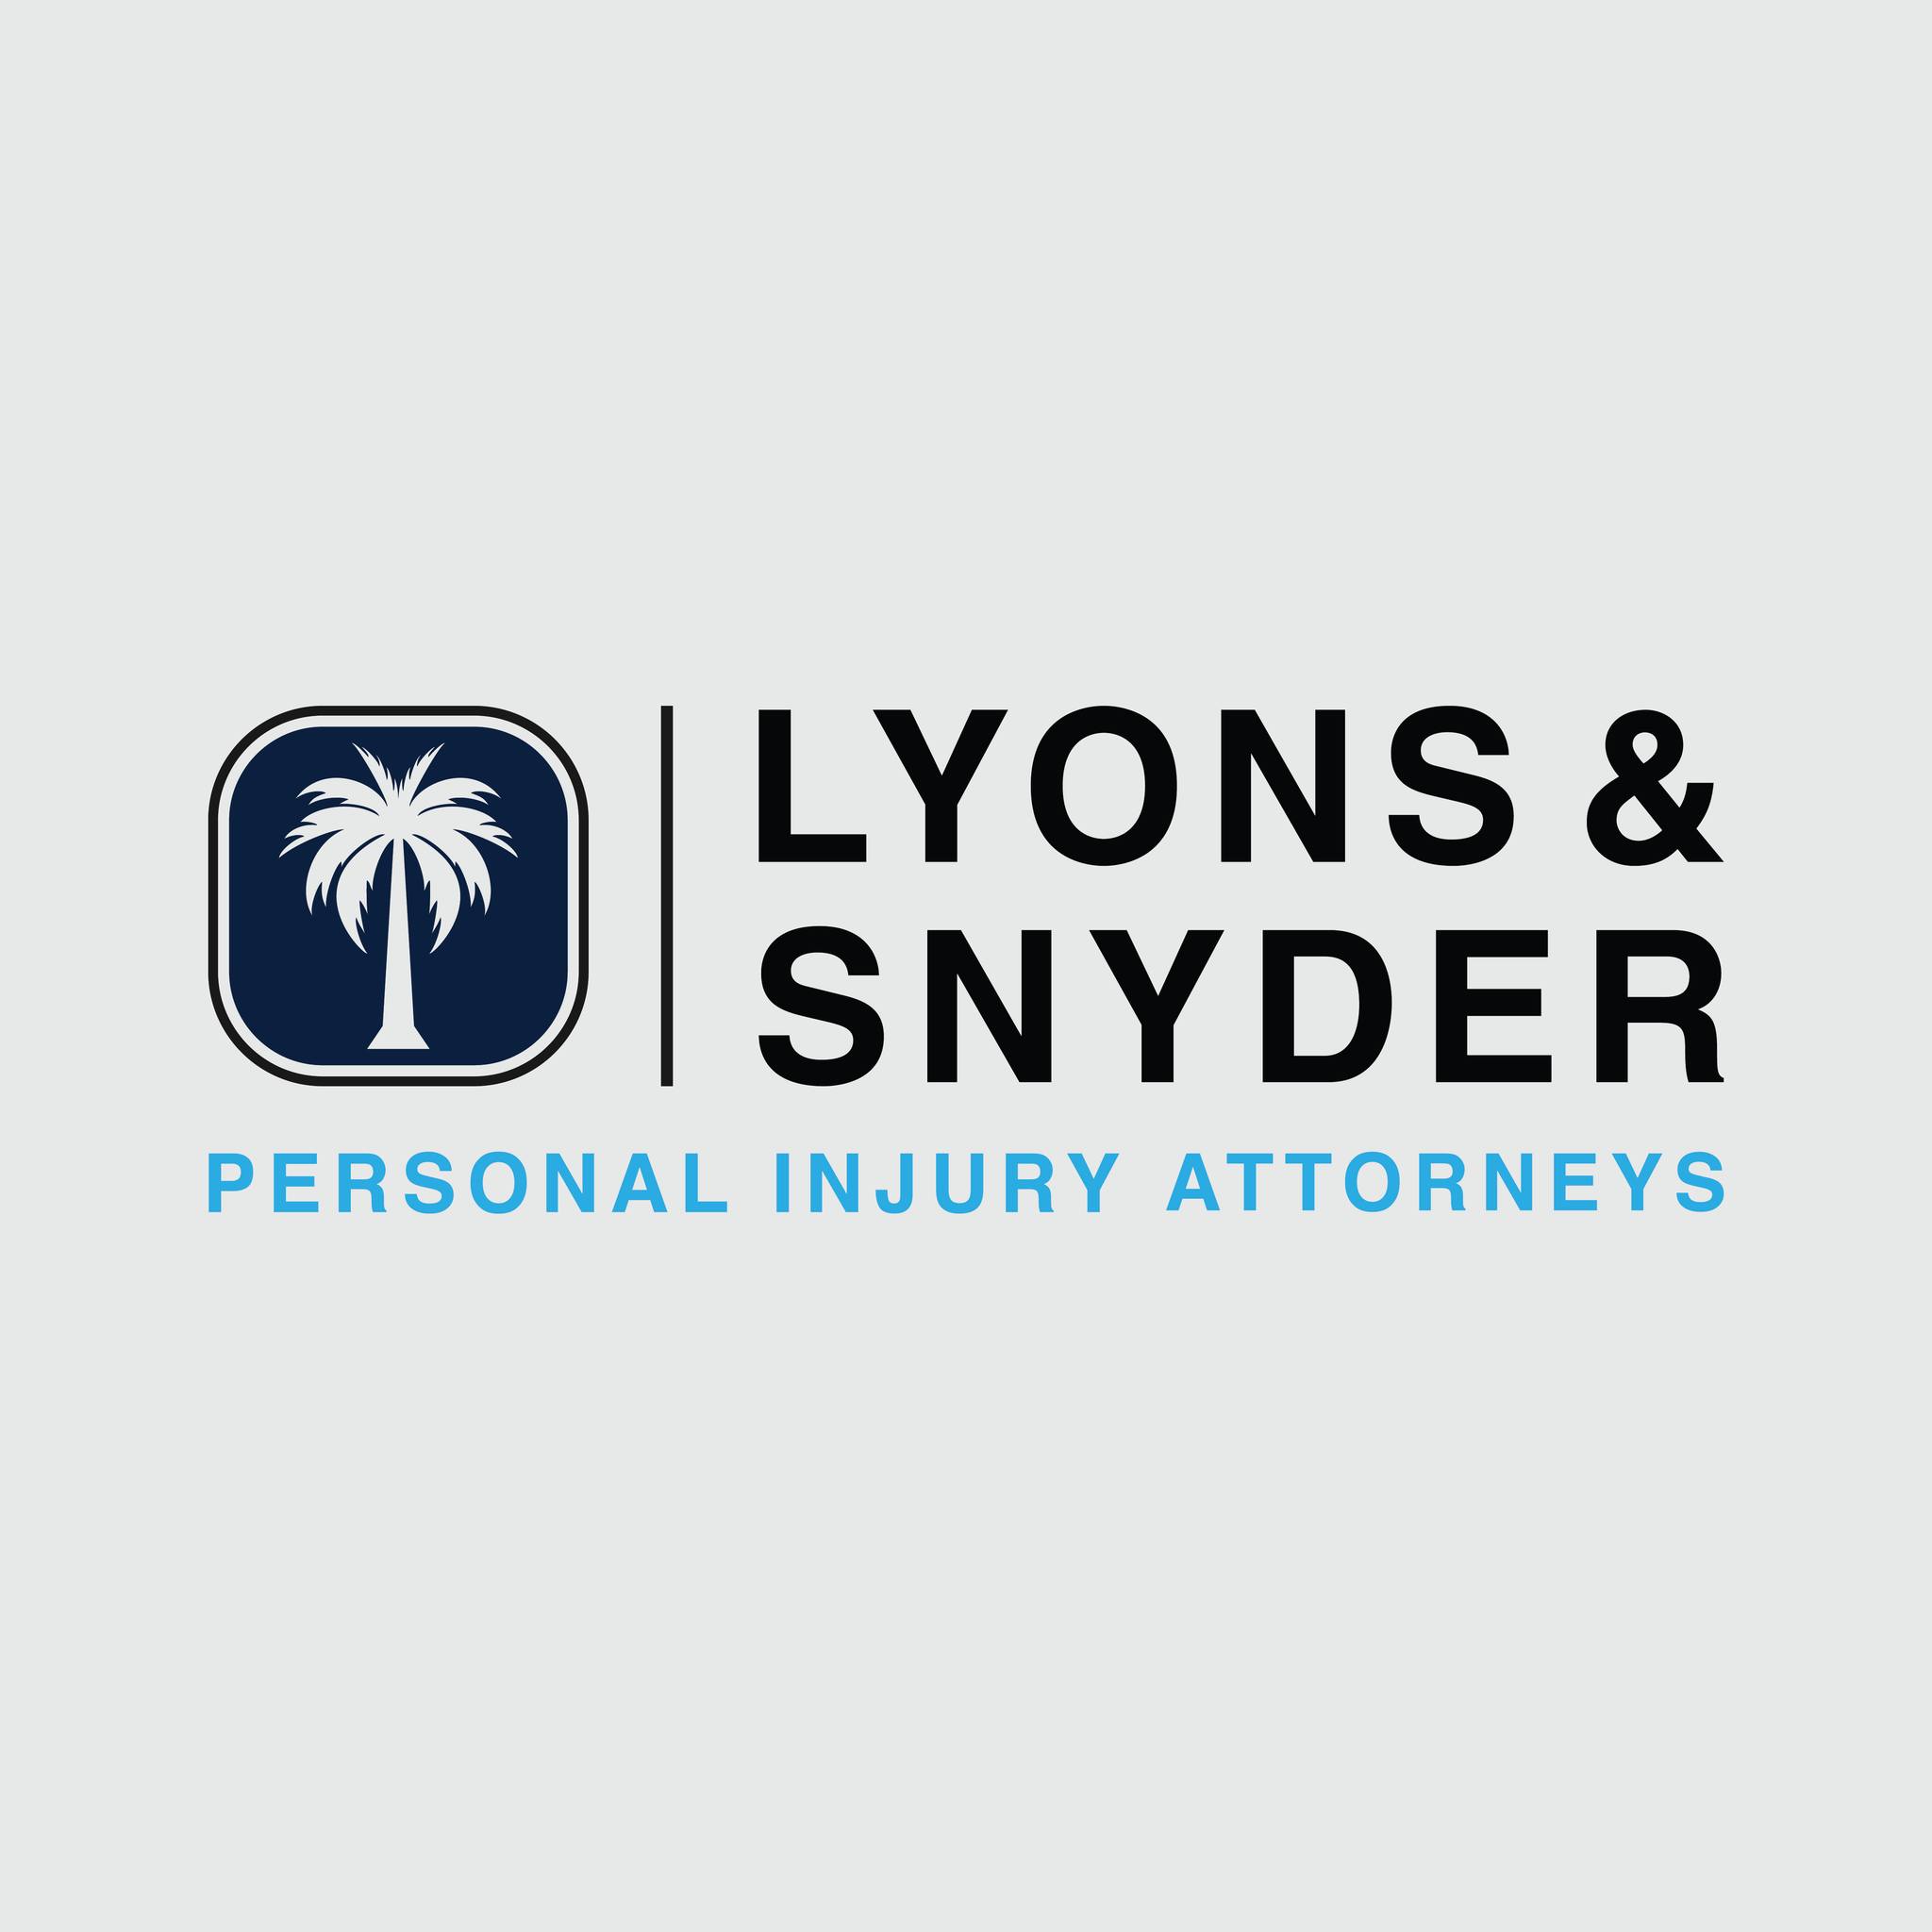 Lyons & Snyder is a Plantation Personal Injury Lawyer That Provides Free Legal Consultation to Locals